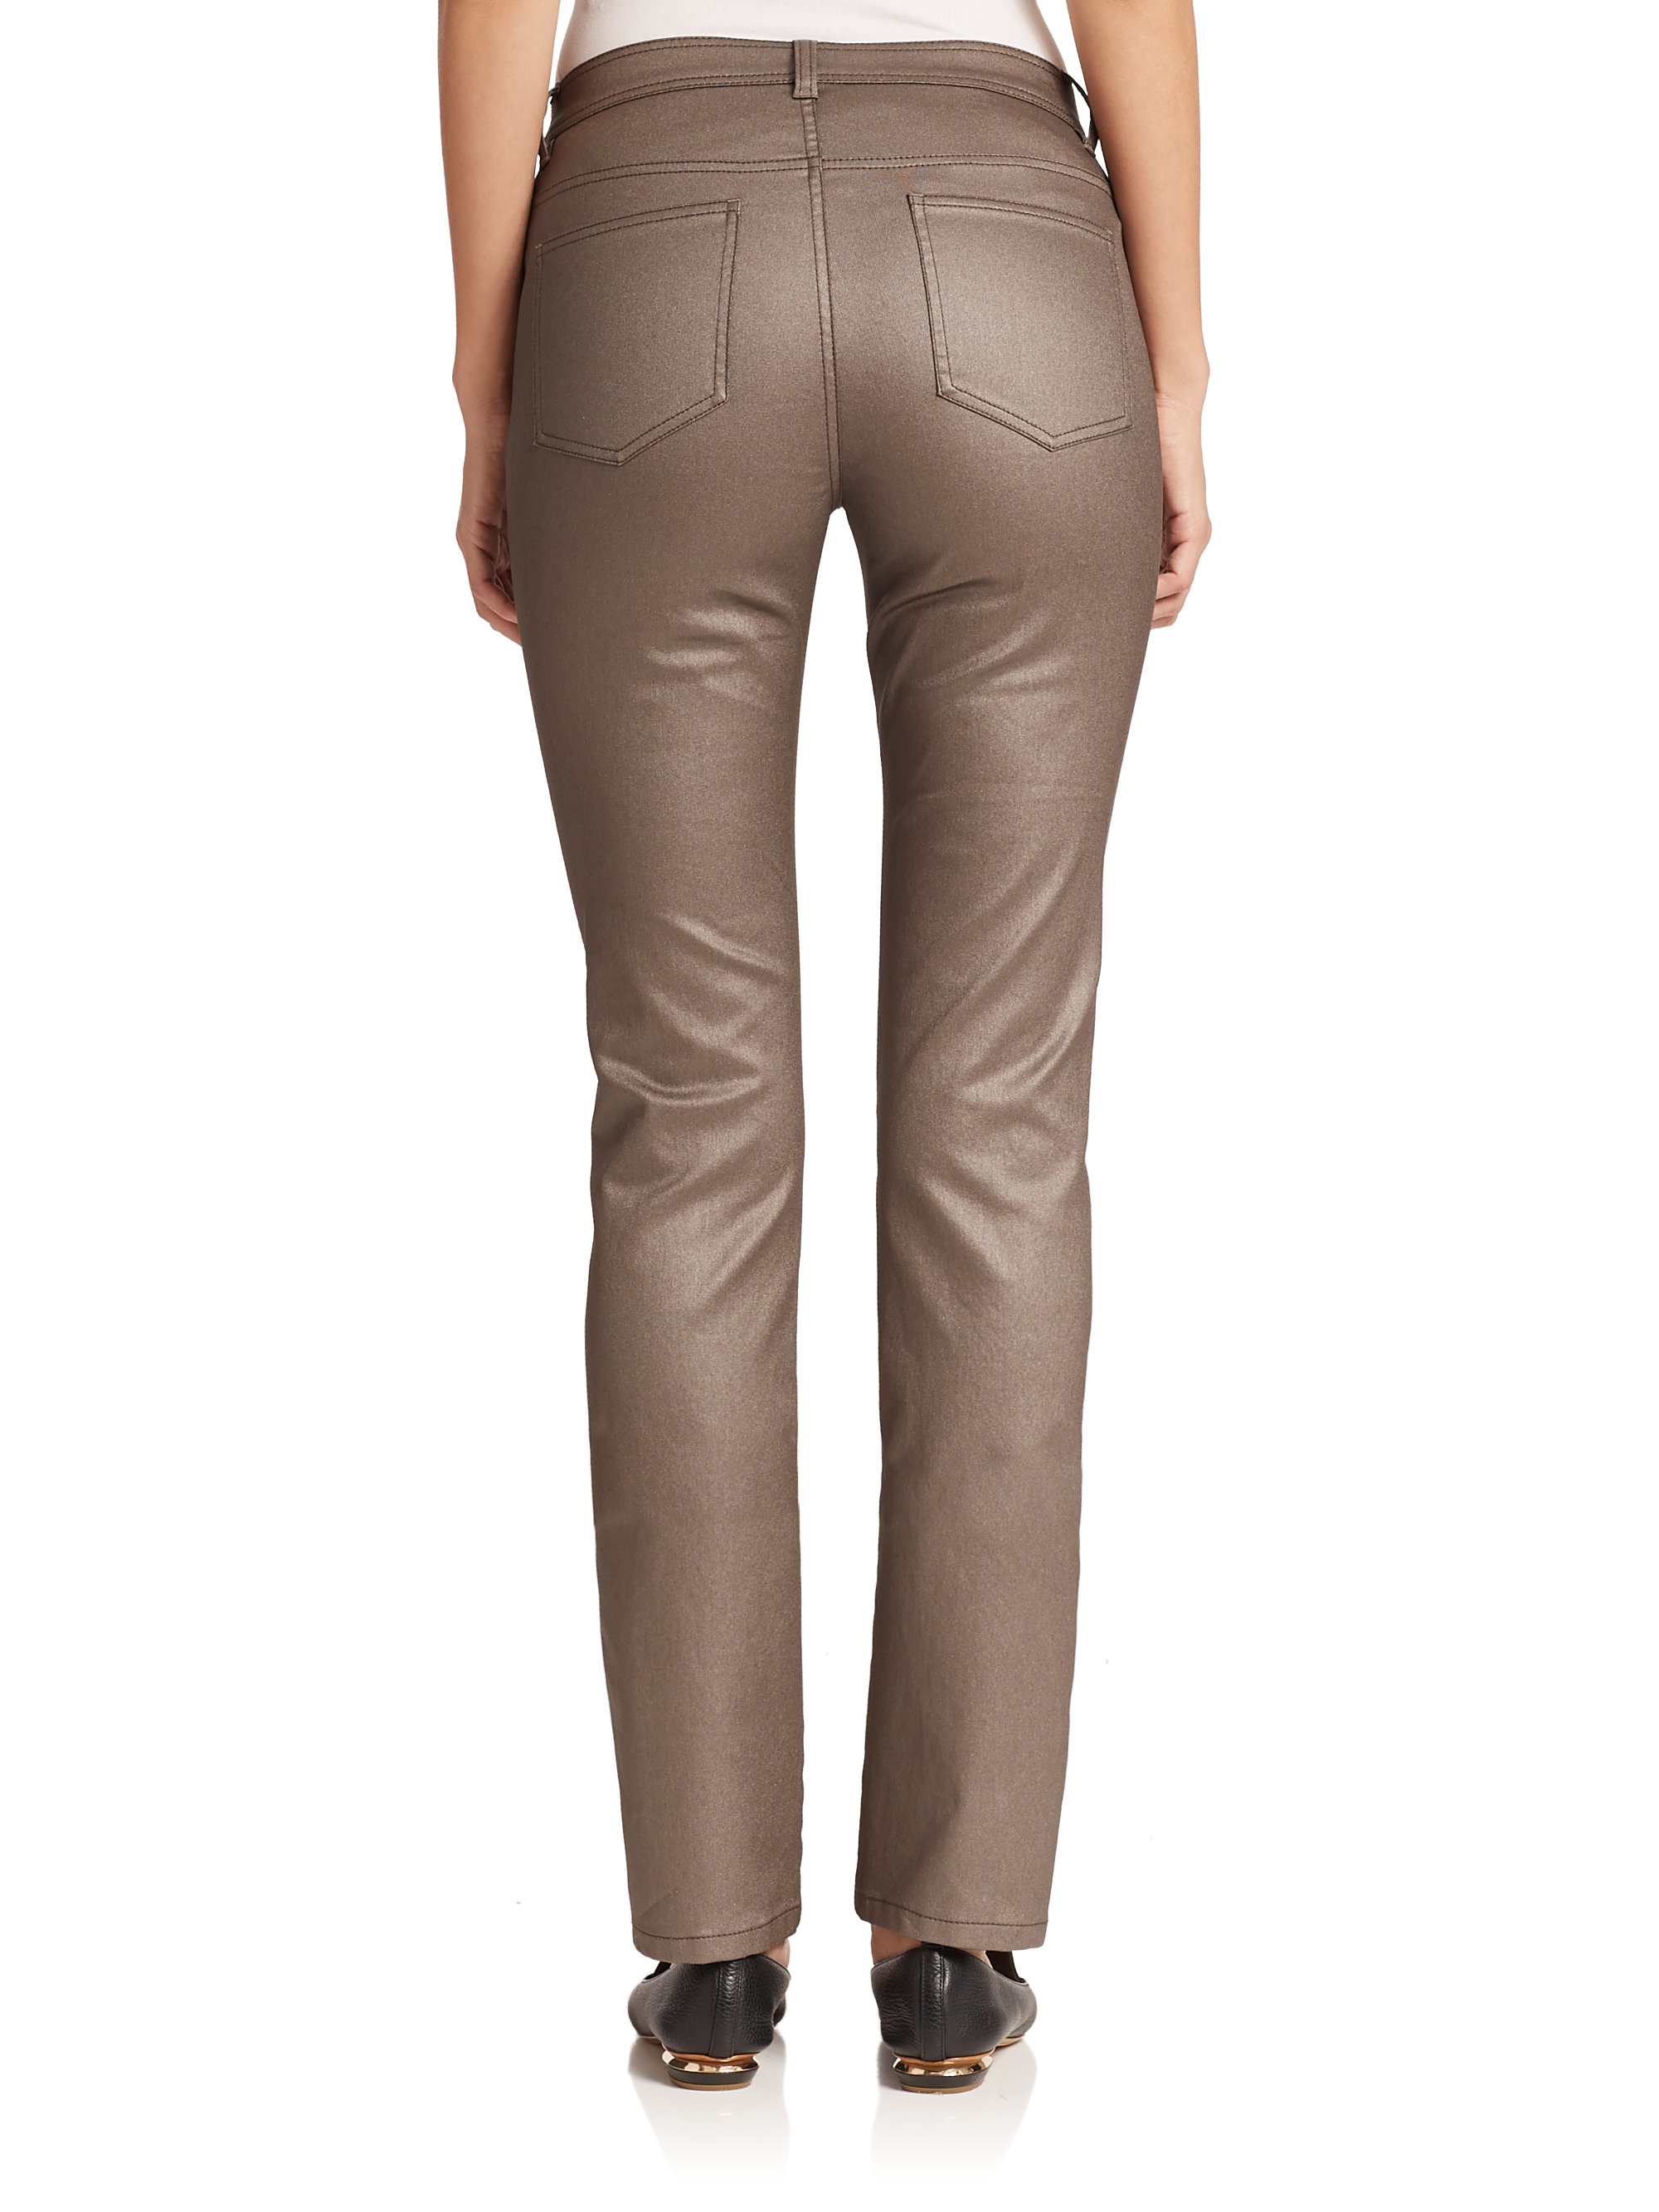 Lyst - Lafayette 148 New York Frosted Skinny Jeans in Brown